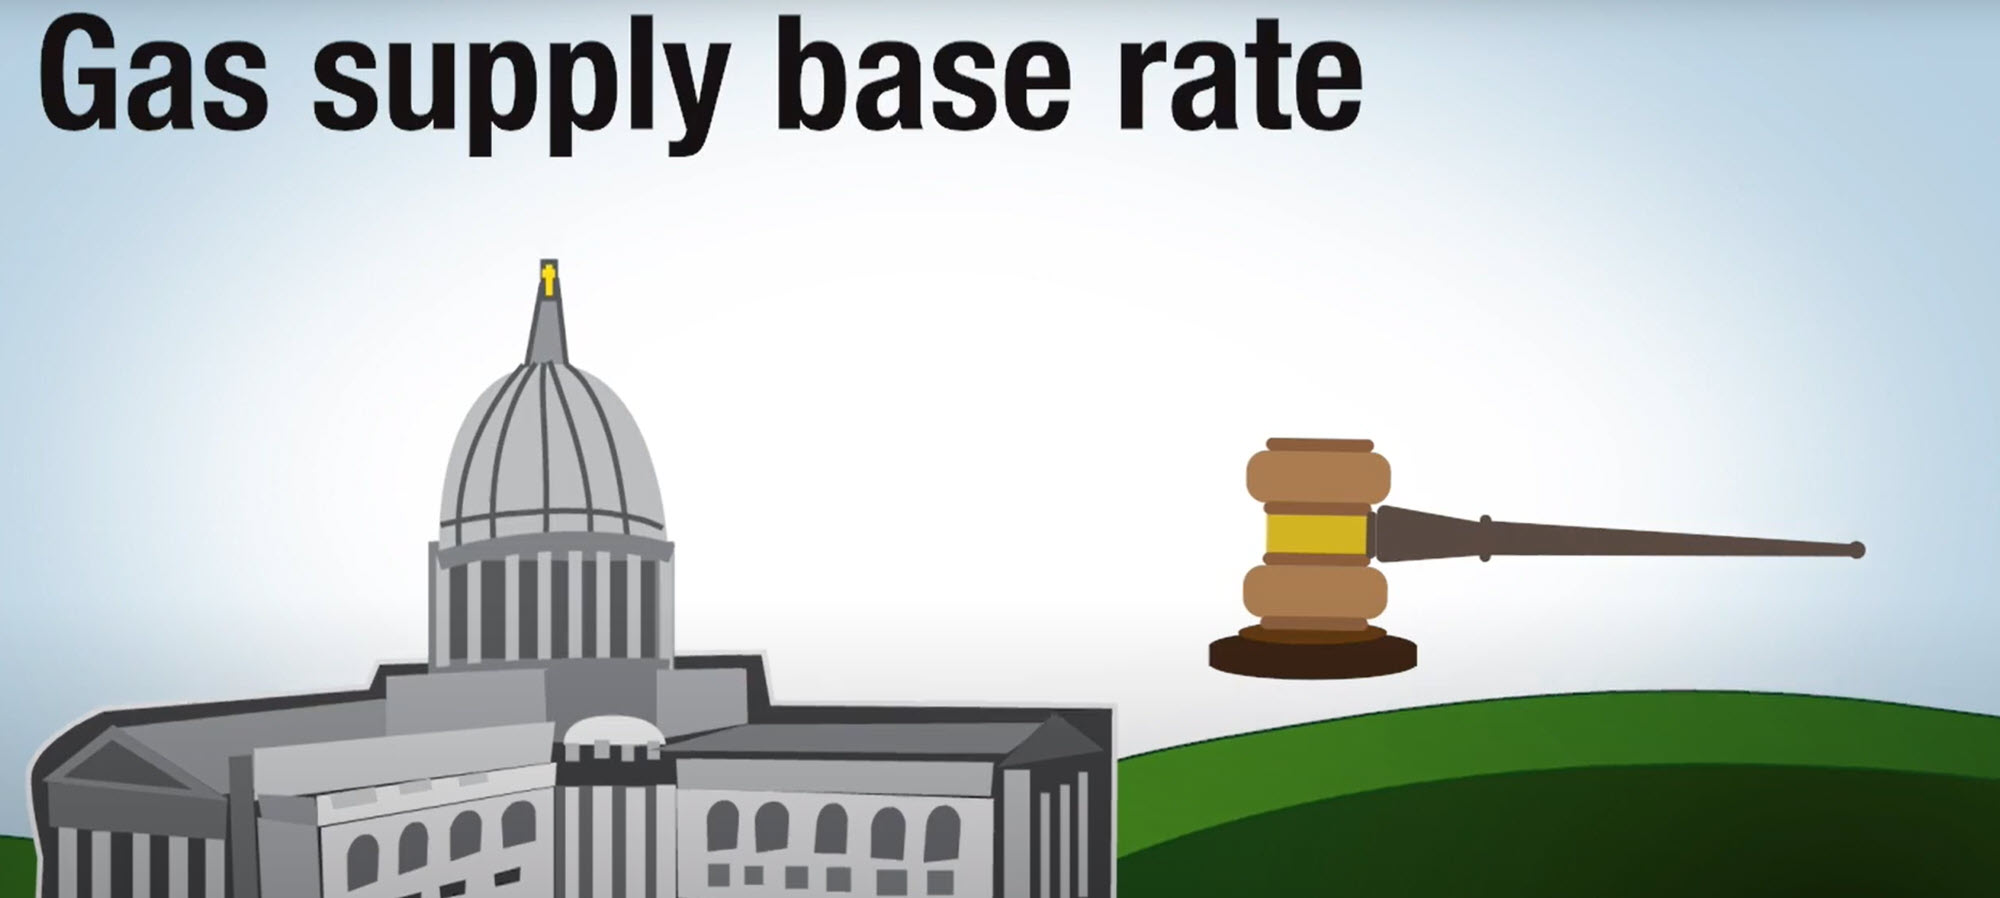 Gas supply base rate